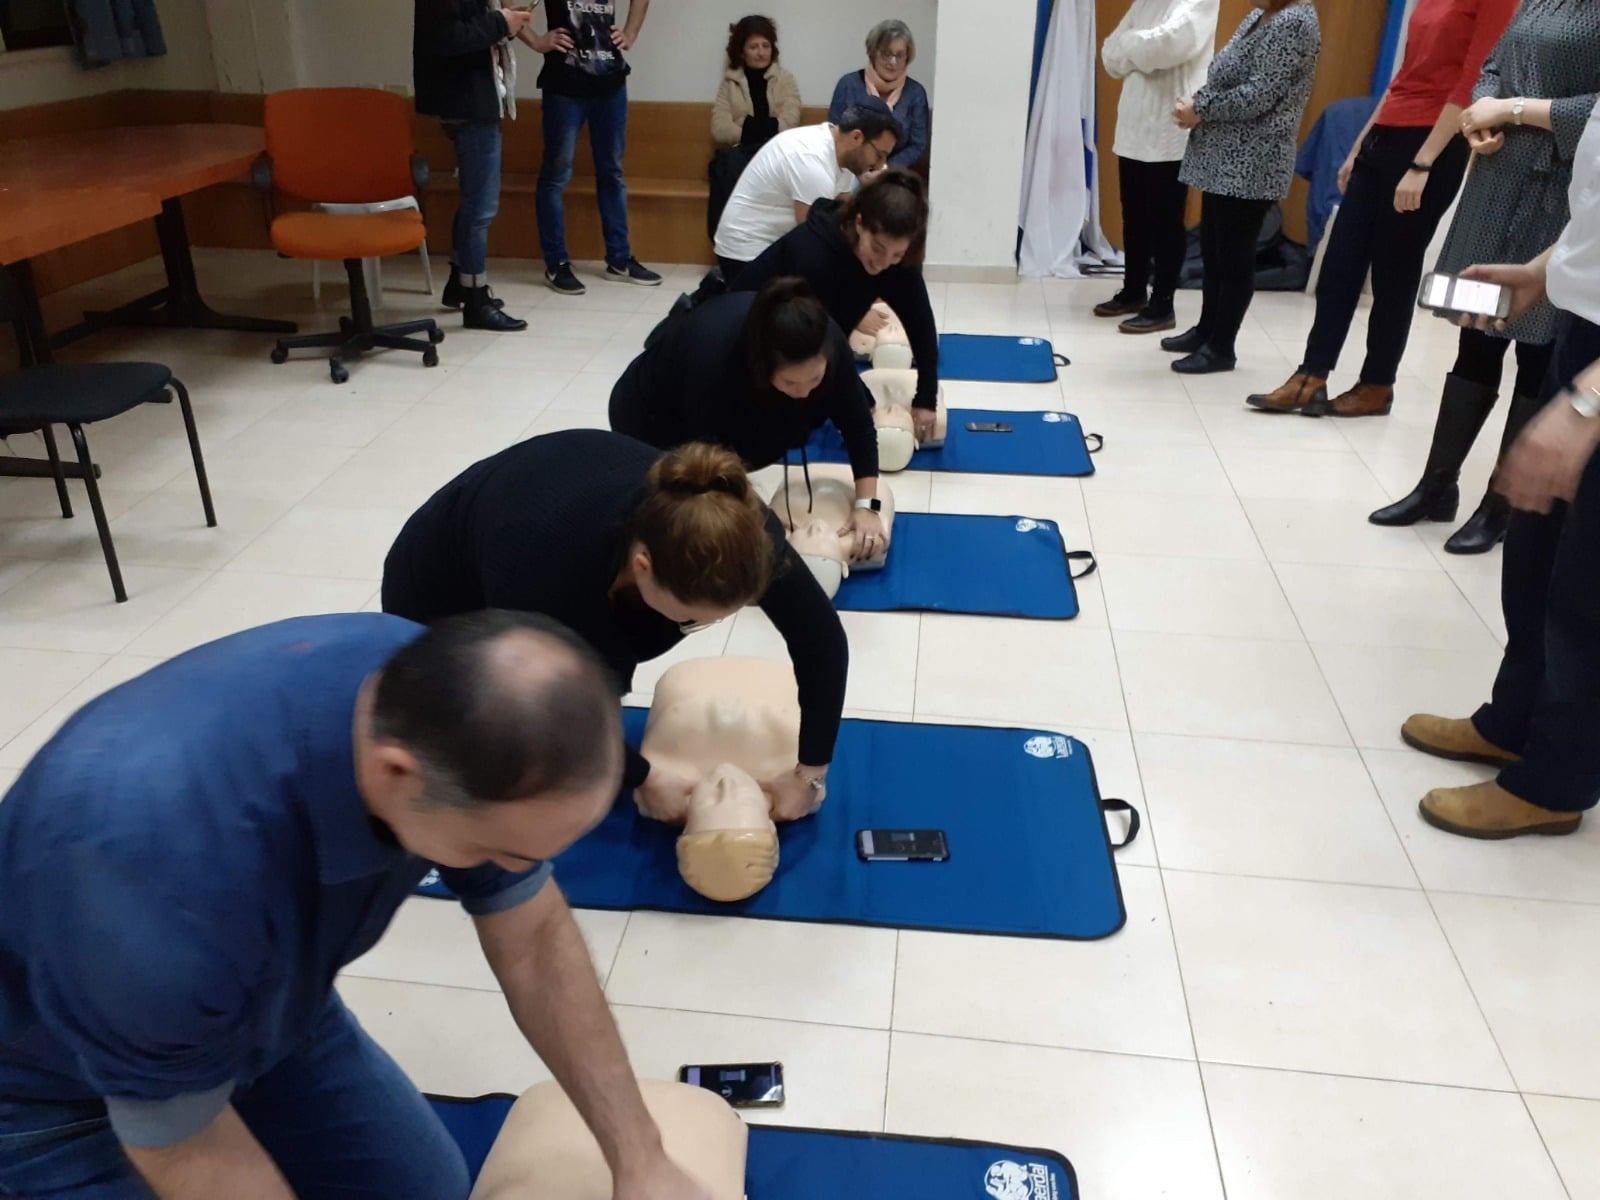 CPR Course In March - Cancelled